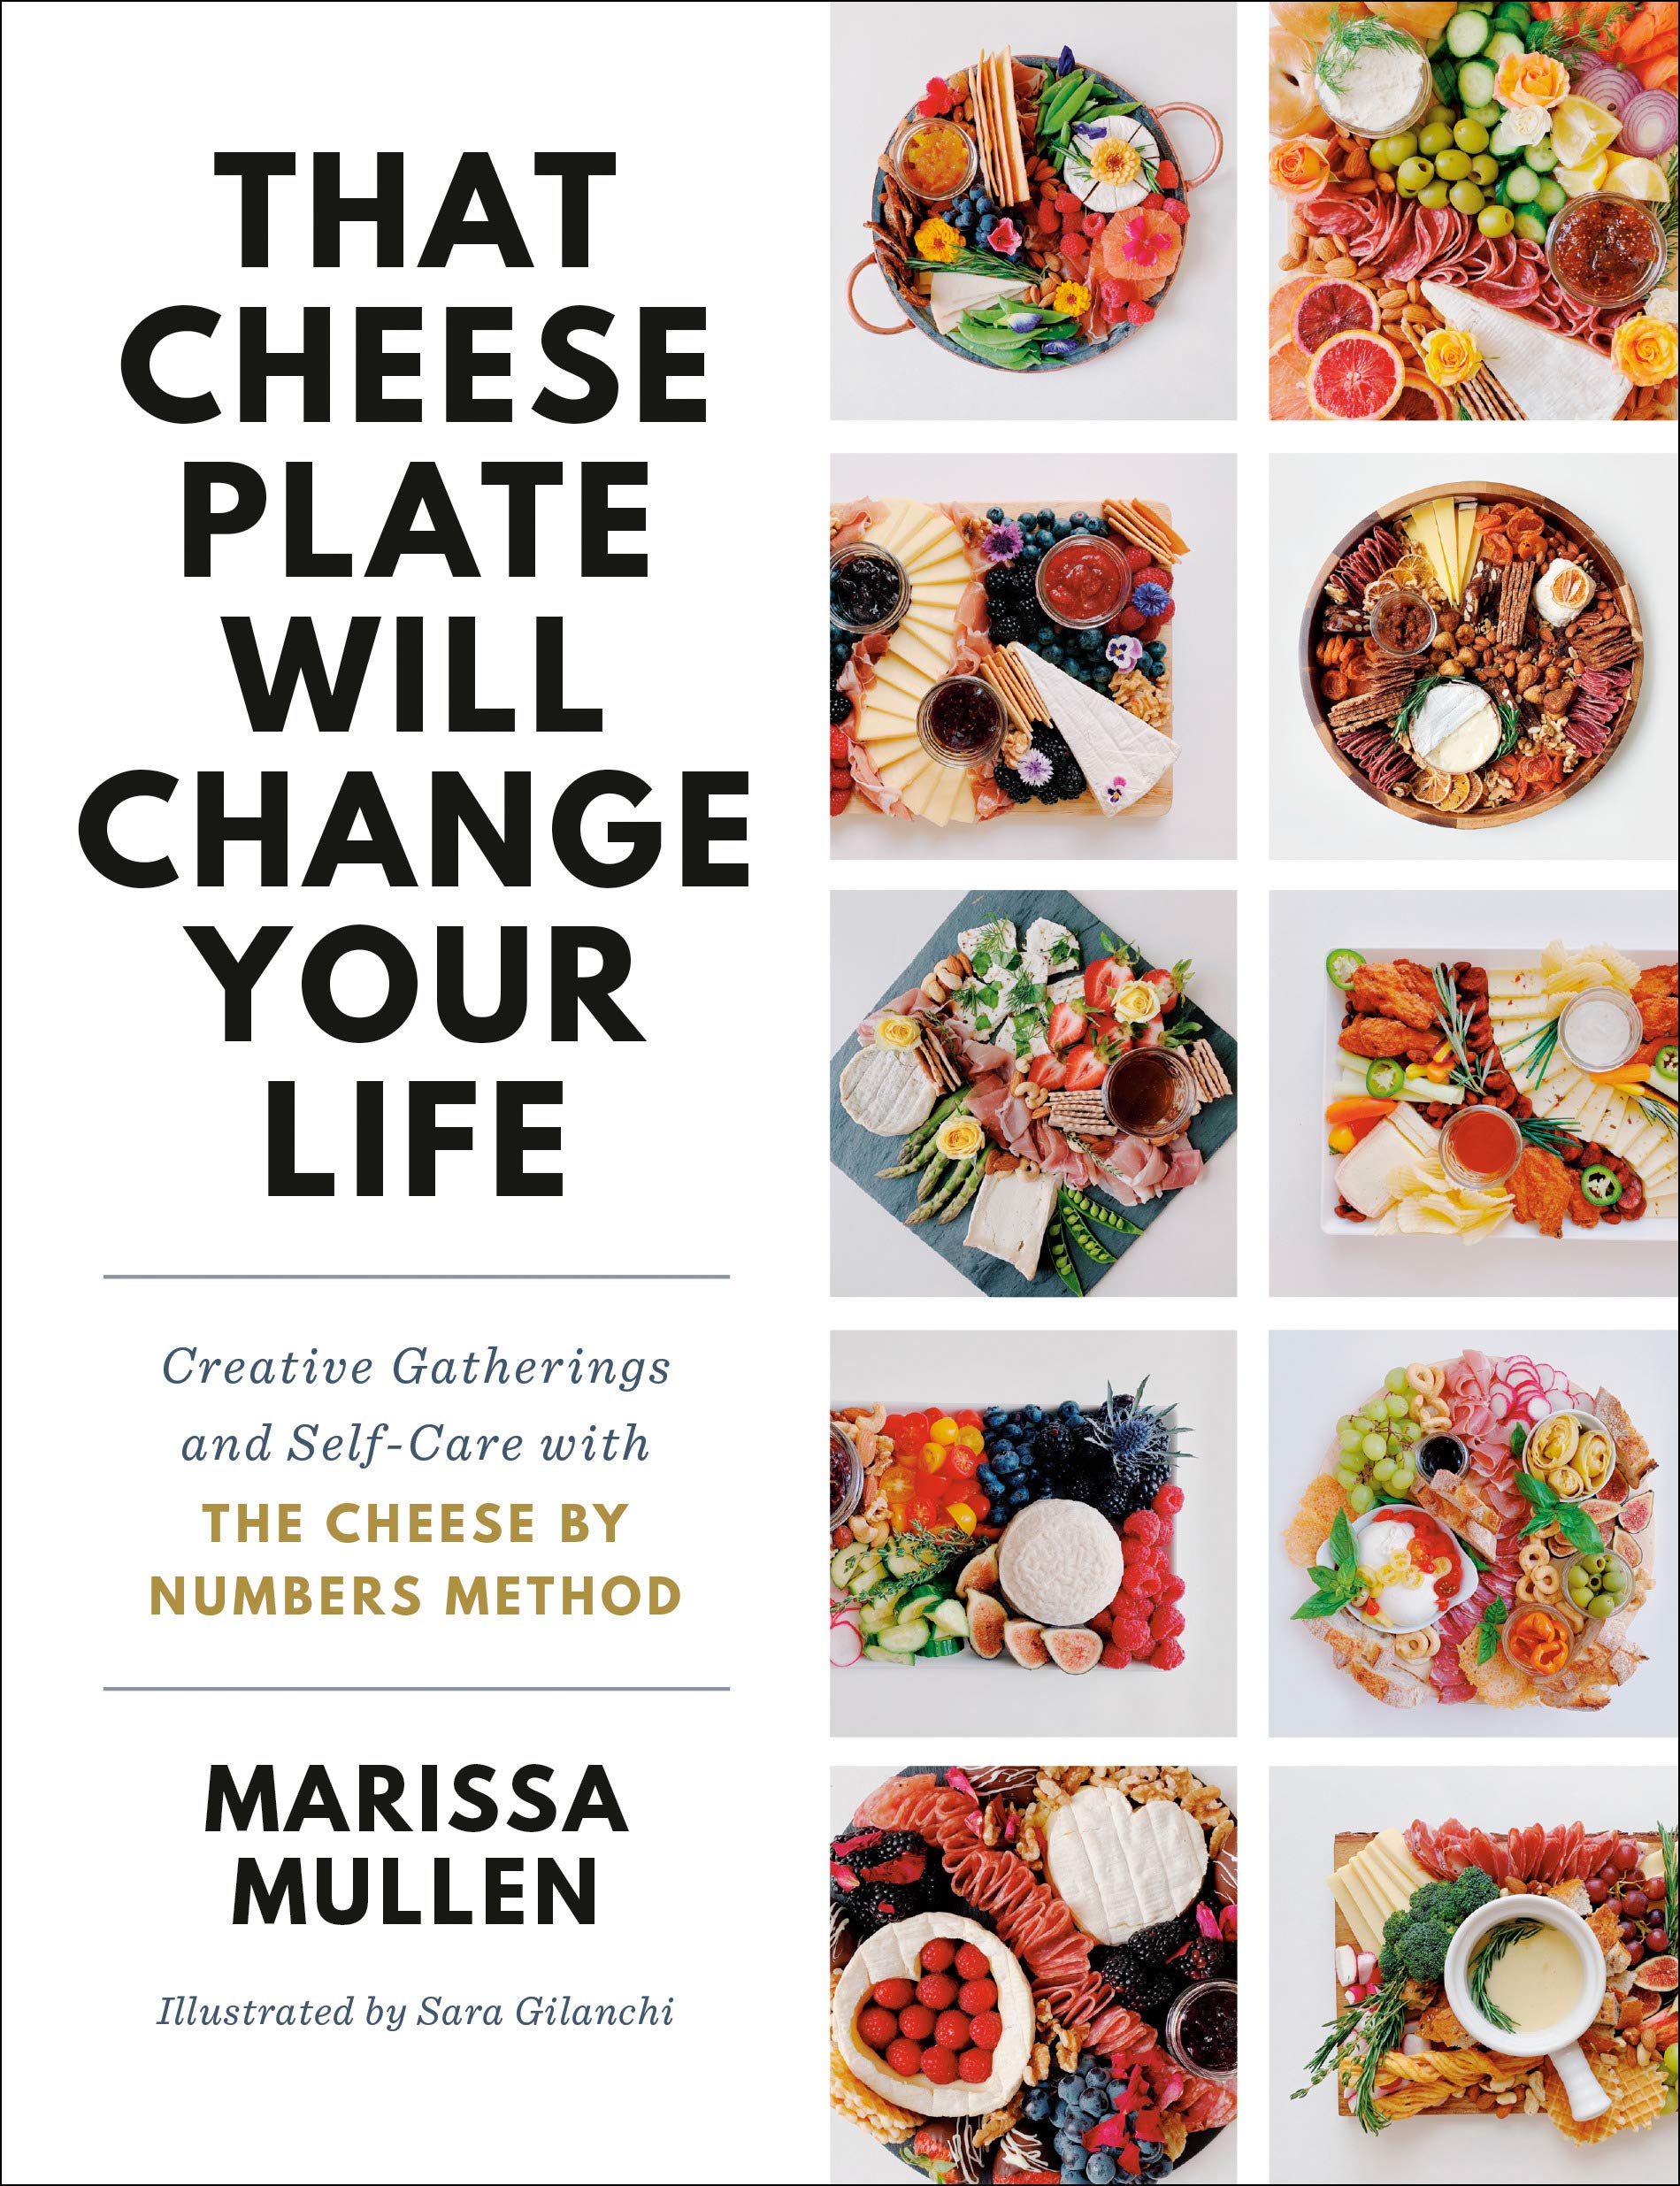 Hot Off the Presses: Family Dramas, Henry VIII's Ill-Fated 5th Wife, & a Guide to Changing Your Life with Cheese